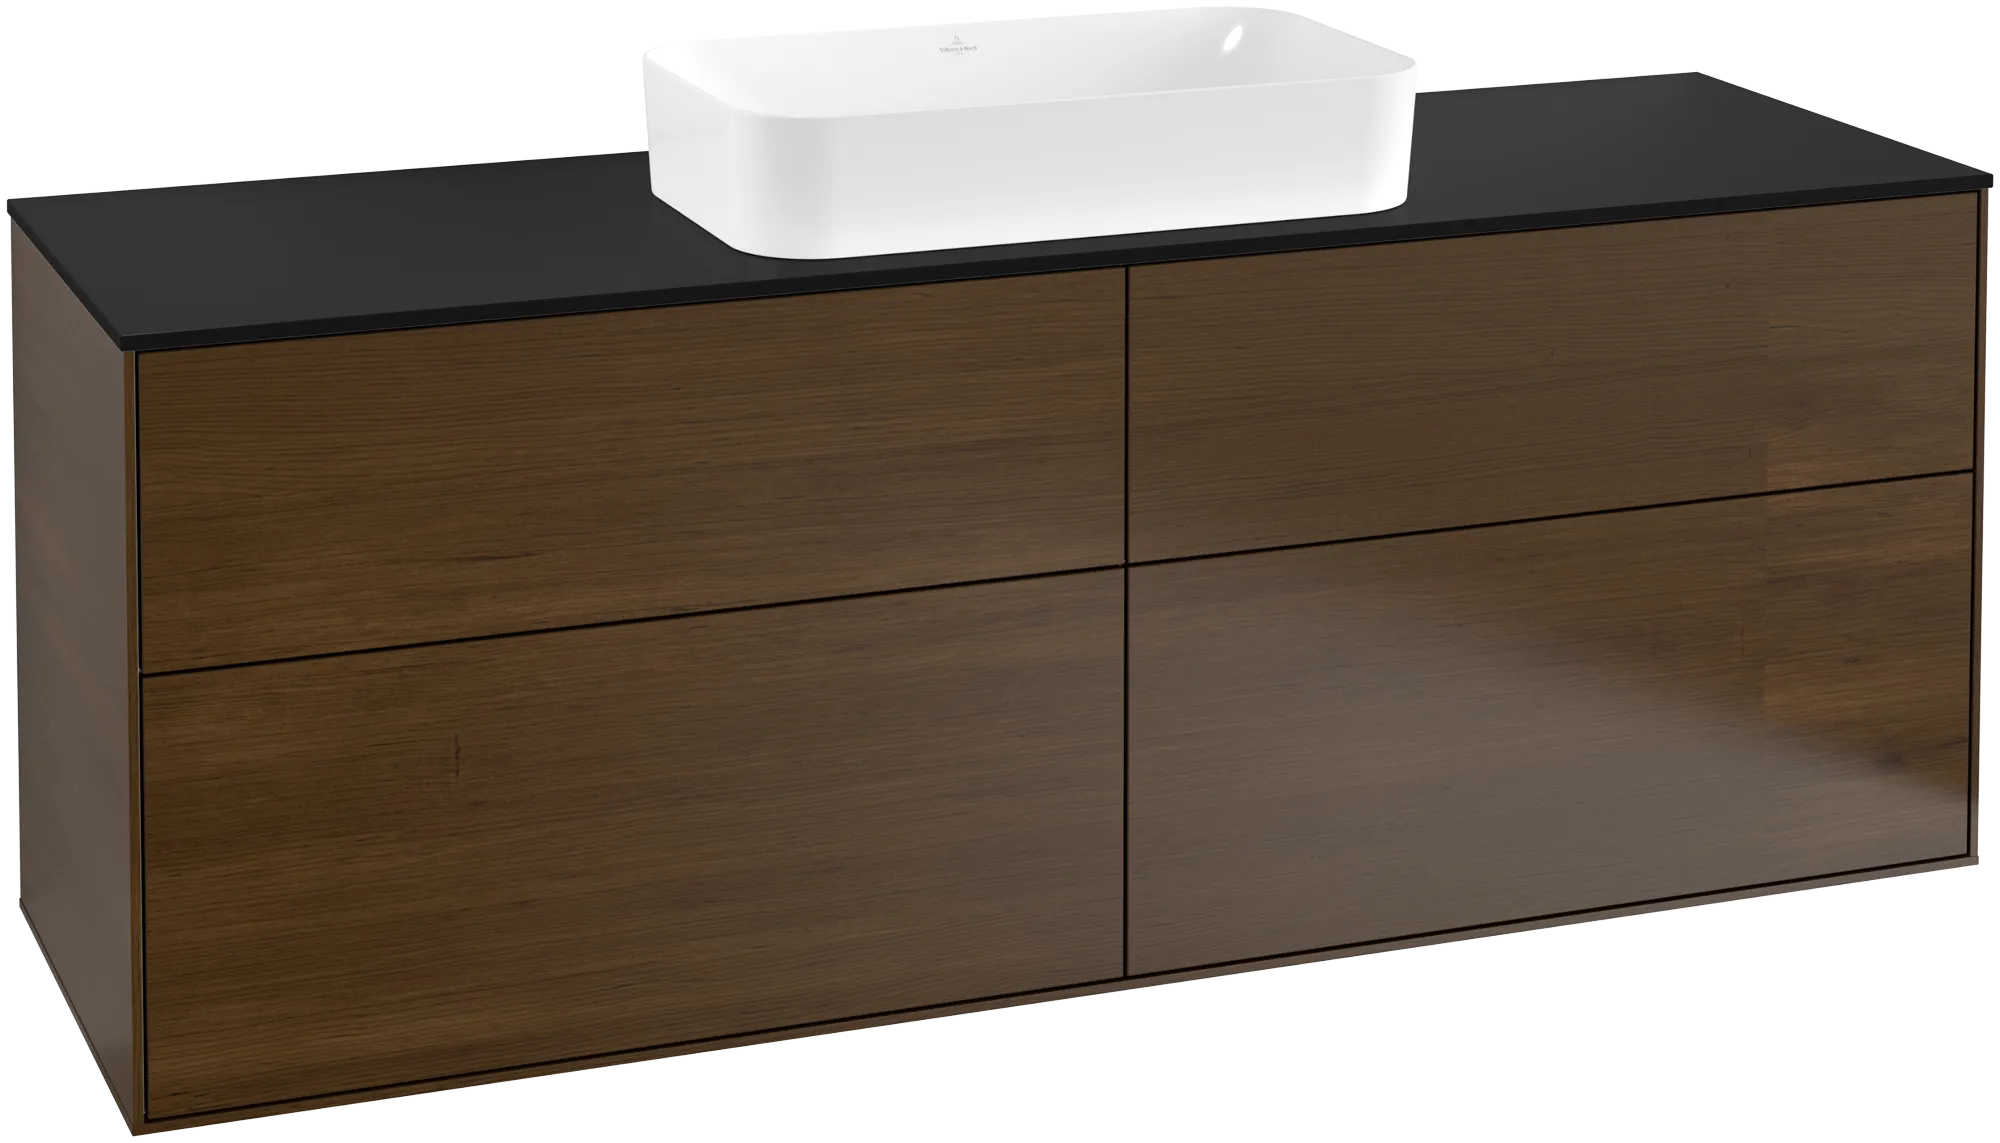 Picture of VILLEROY BOCH Finion Vanity unit, with lighting, 4 pull-out compartments, 1600 x 603 x 501 mm, Walnut Veneer / Glass Black Matt #G32200GN